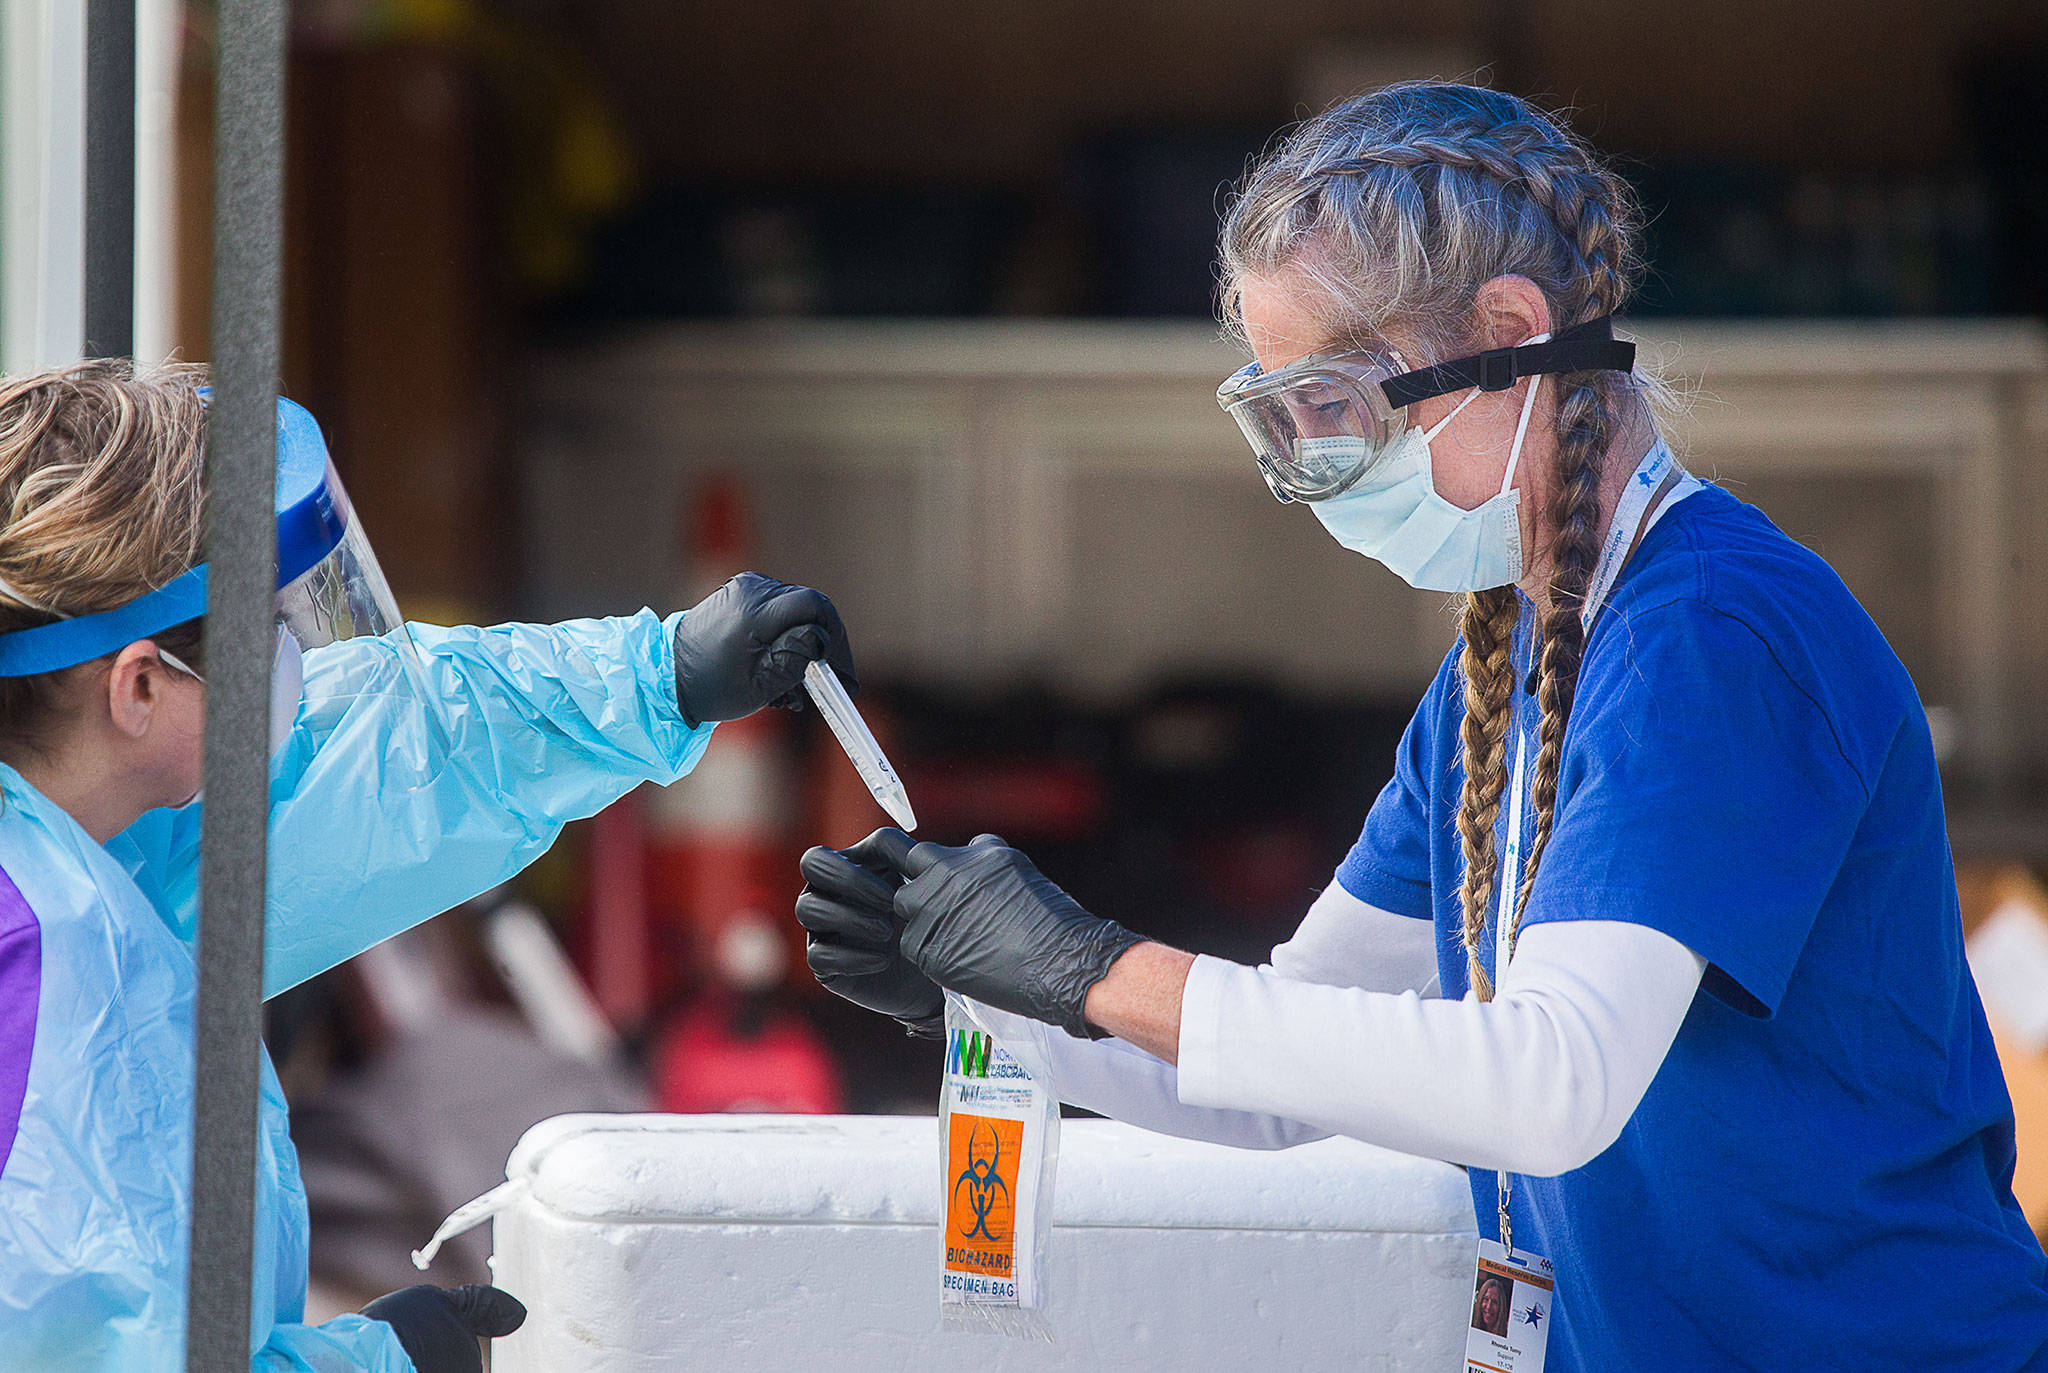 Medical Reserve Corps volunteer Rhonda Tumy collects a sample from a registered nurse at a COVID-19 testing site held at McCollum Park on June 30 in Everett. (Andy Bronson / Herald file)